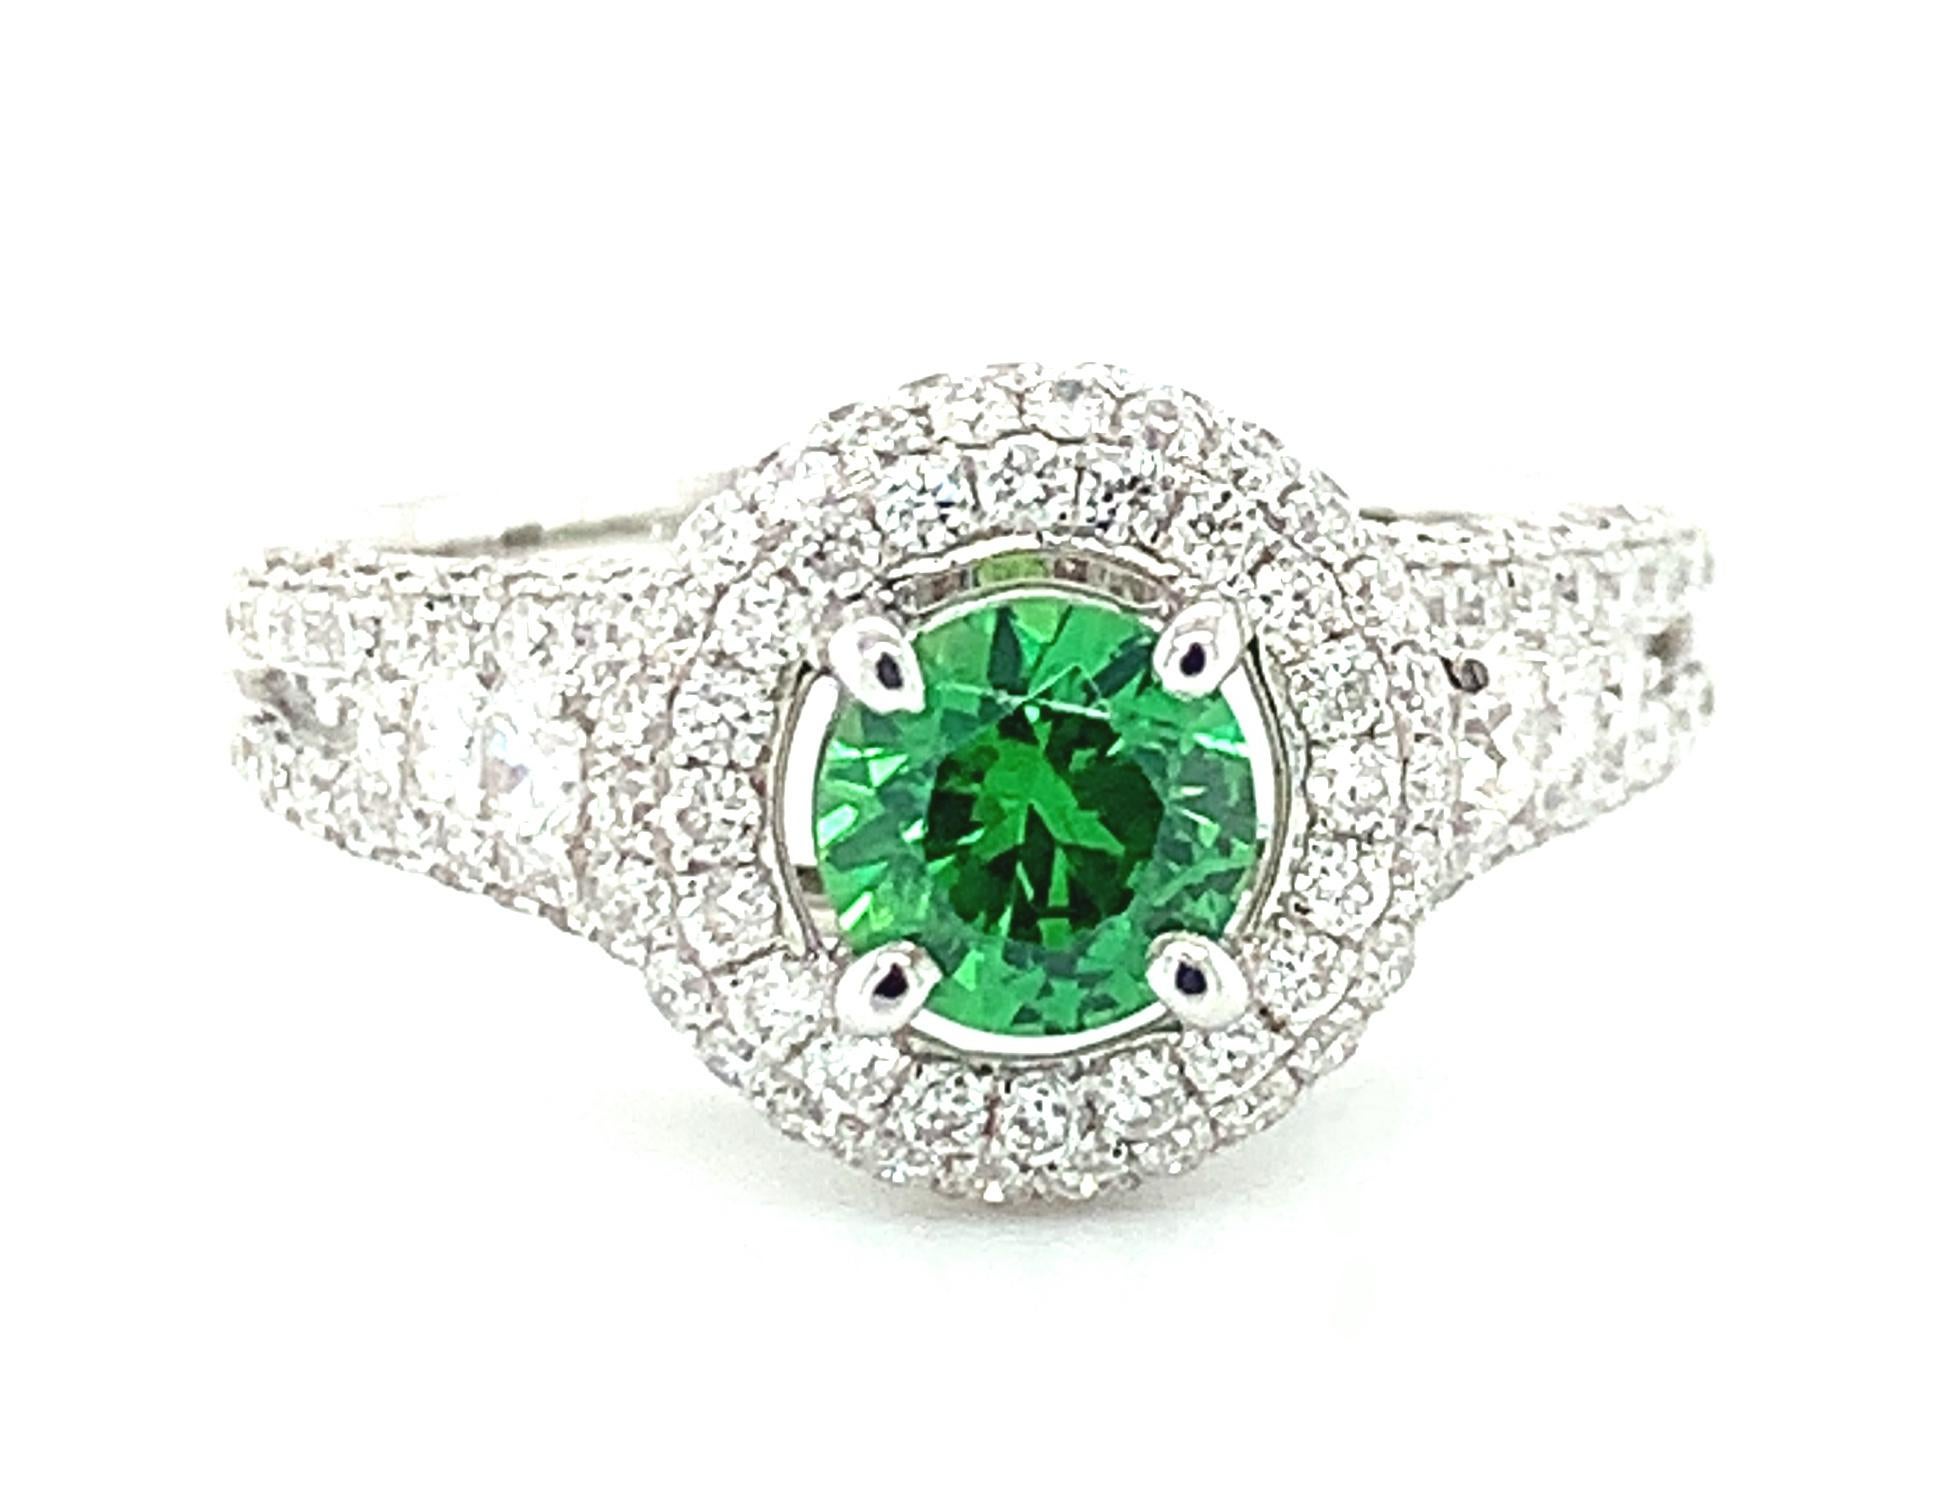 Brilliant and bright, this tsavorite garnet and diamond ring is dazzling! A beautiful, round, vibrant green tsavorite garnet is framed by not one or two, but three rows of sparkling white diamonds that weigh over a carat total! 
The center stone is